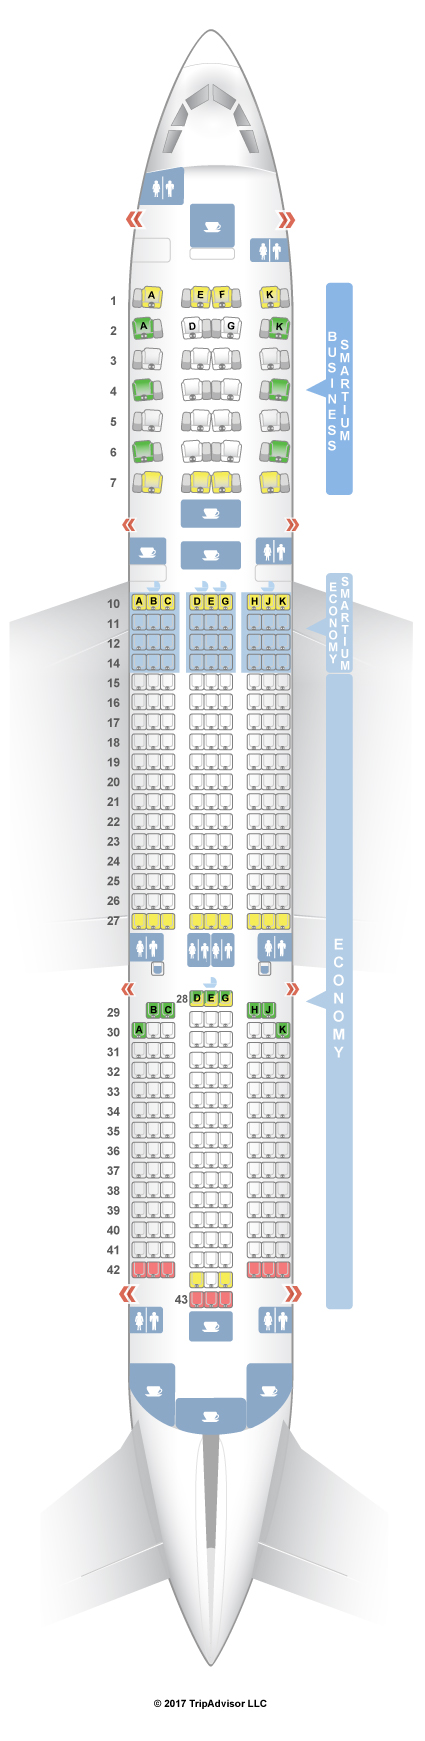 Asiana Airlines A380 Seating Chart